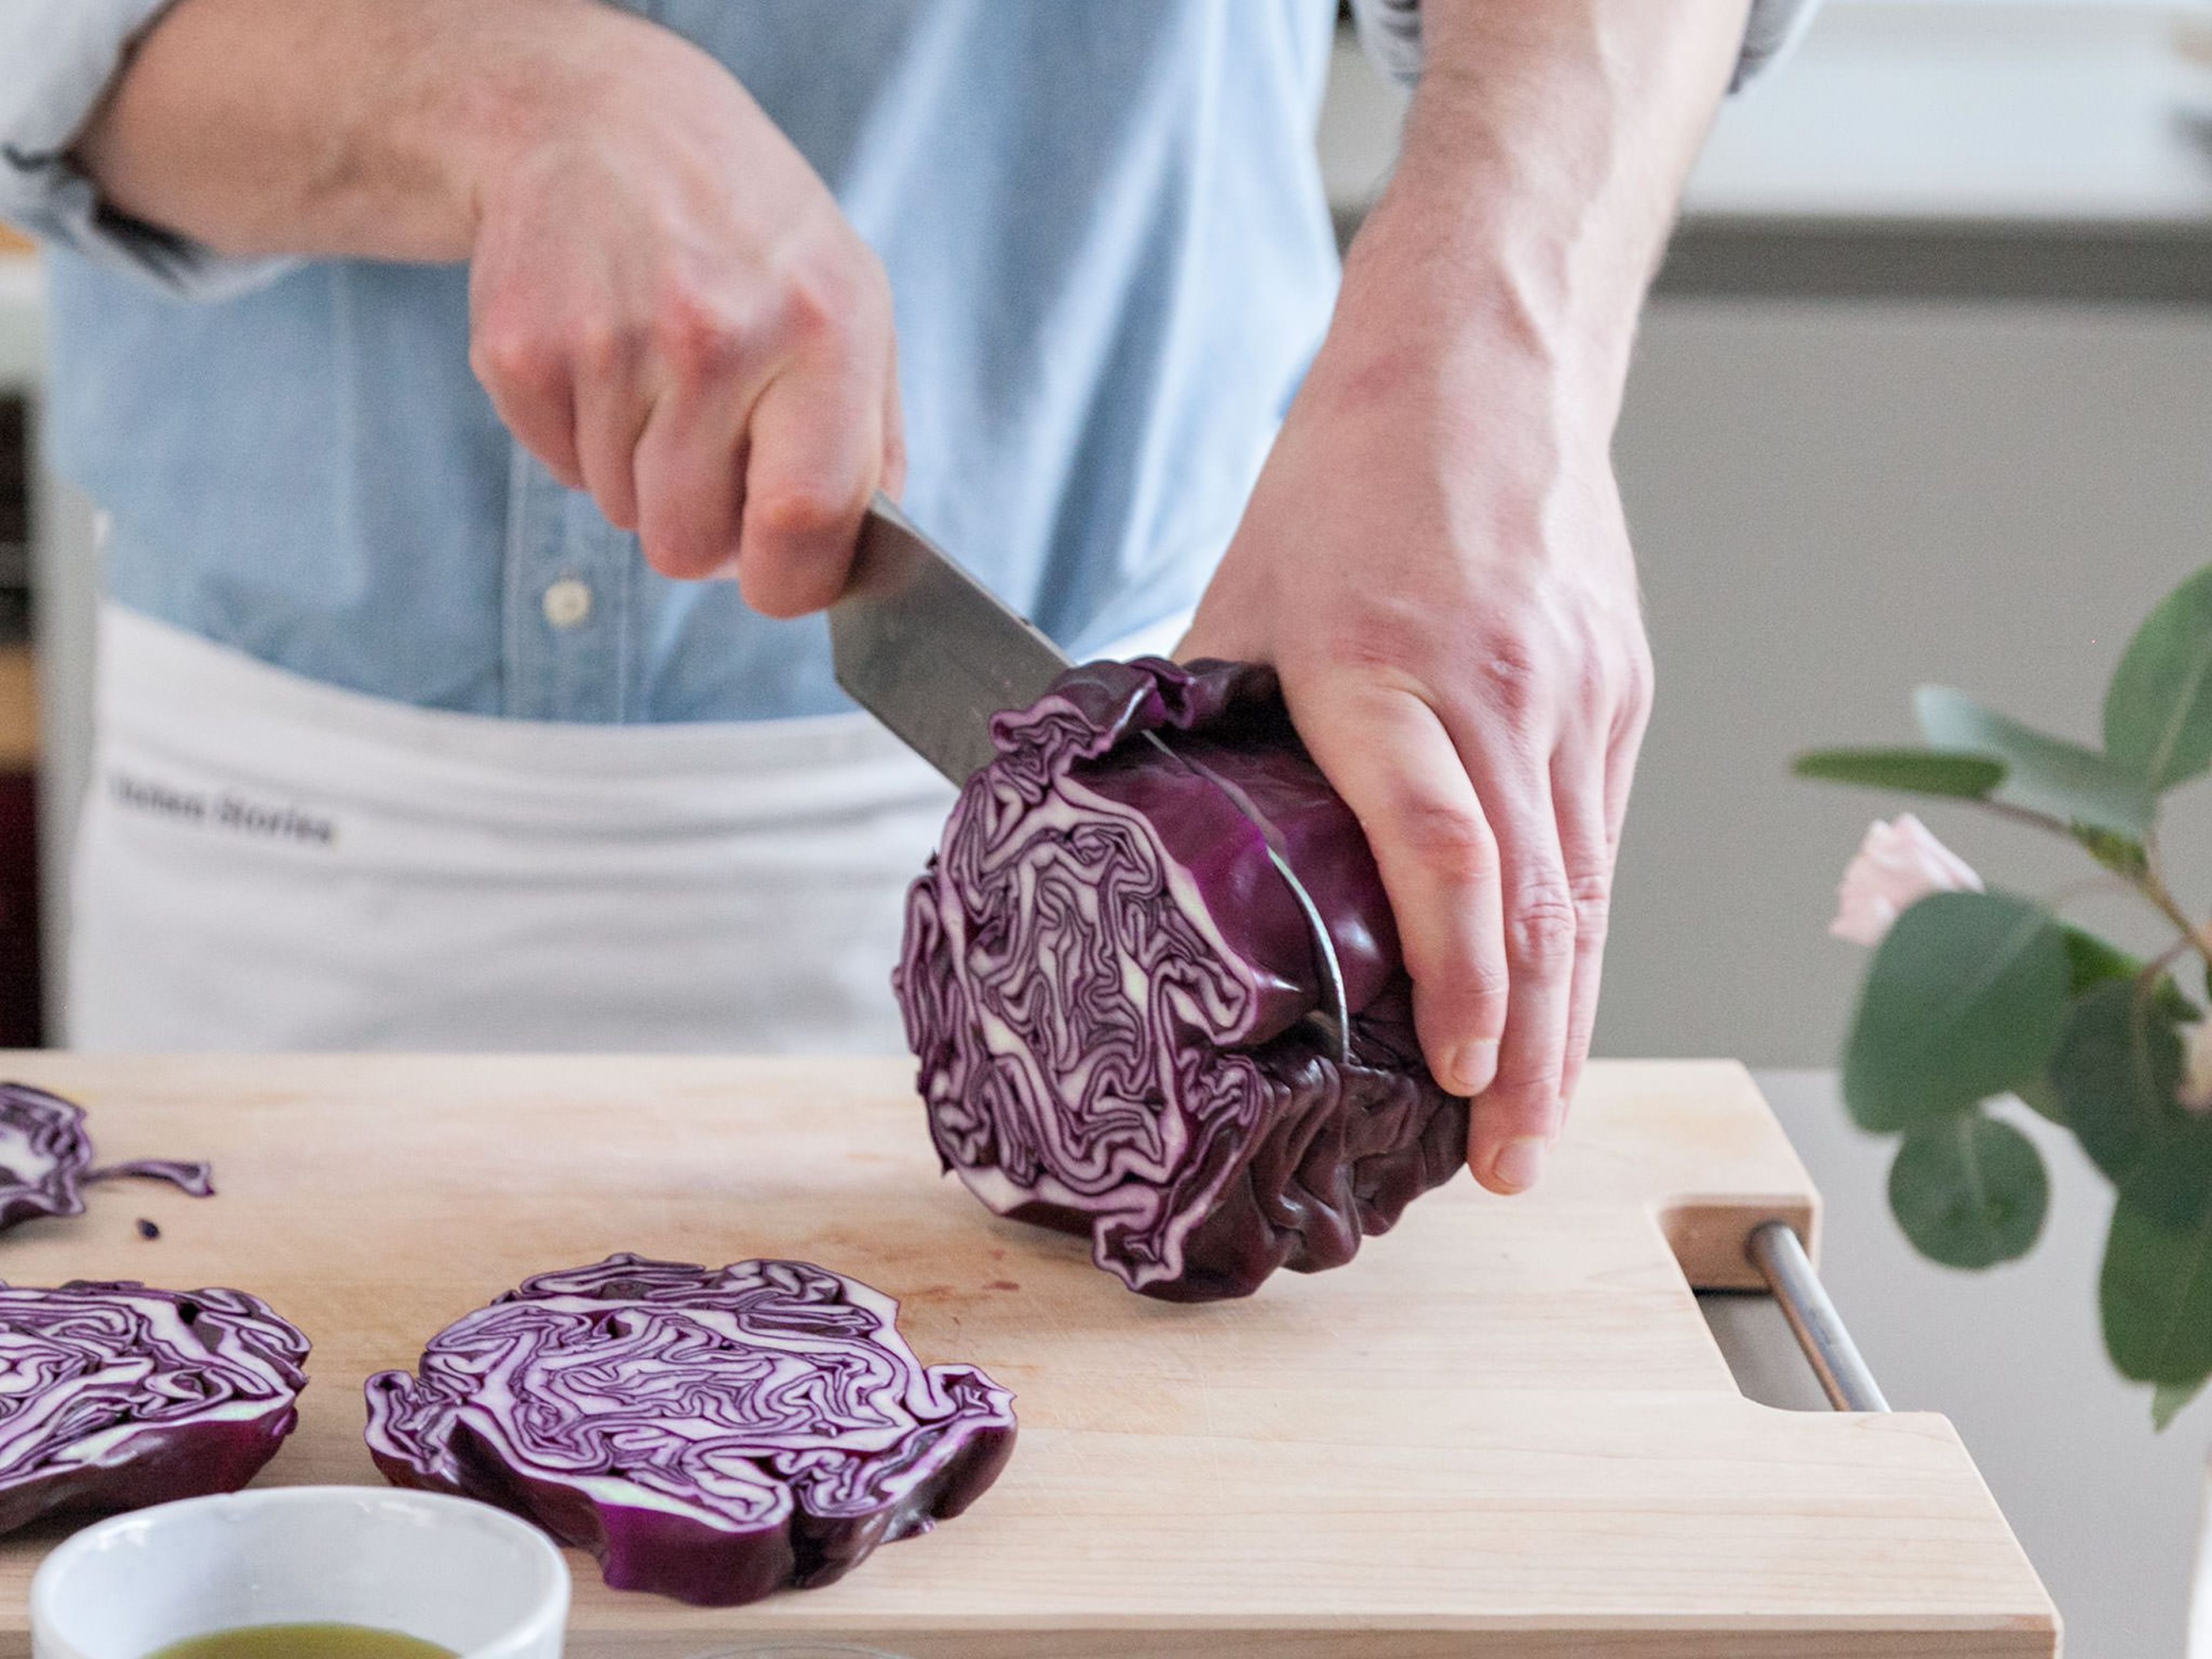 Preheat oven to 160°C/325°F. Cut red cabbage into thumb-thick slices.